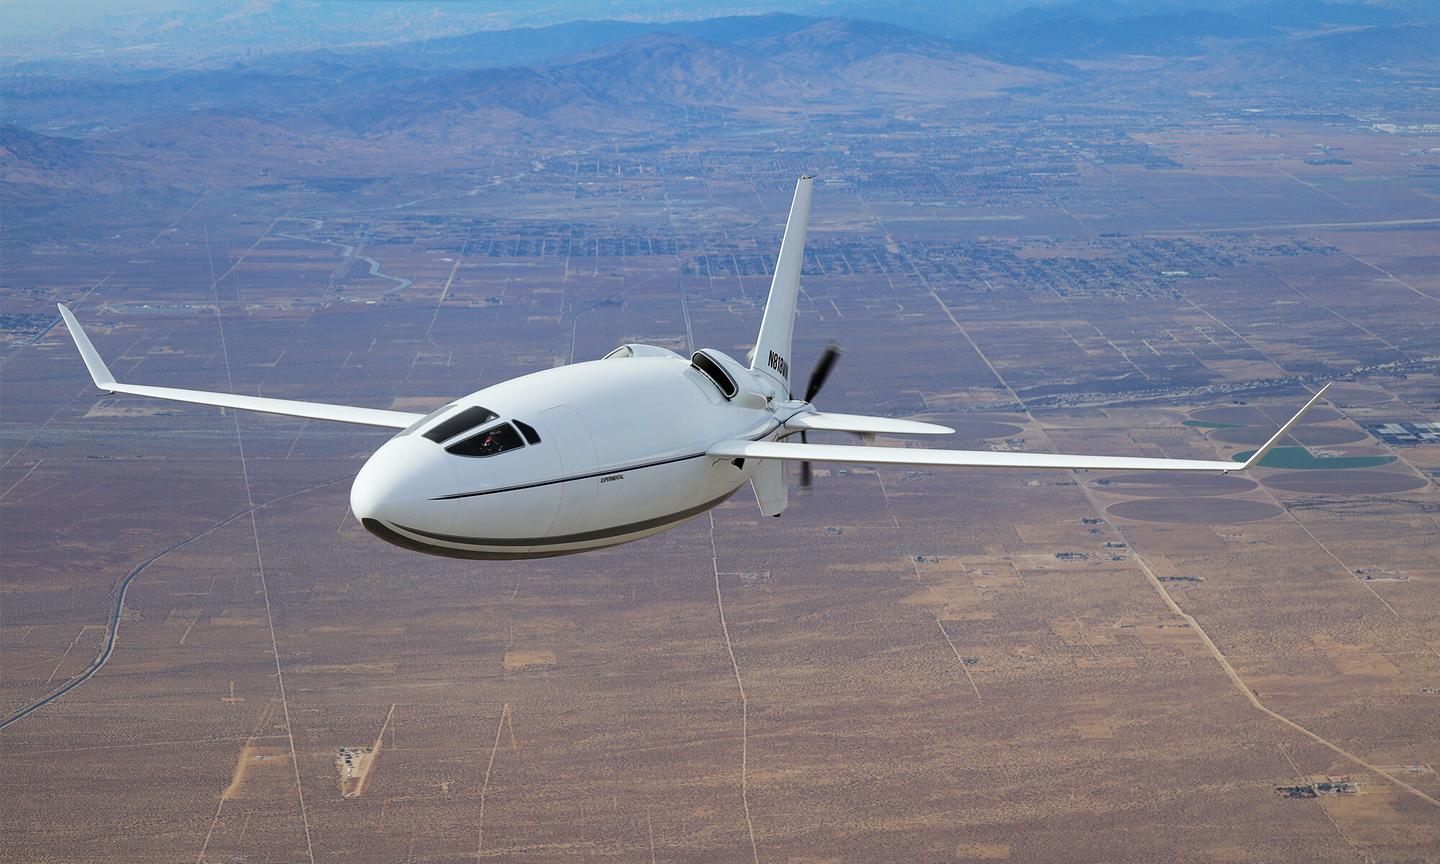 Otto Aviation's Celera 500L prototype in flight: the world's most efficient passenger aircraft design by a country mile